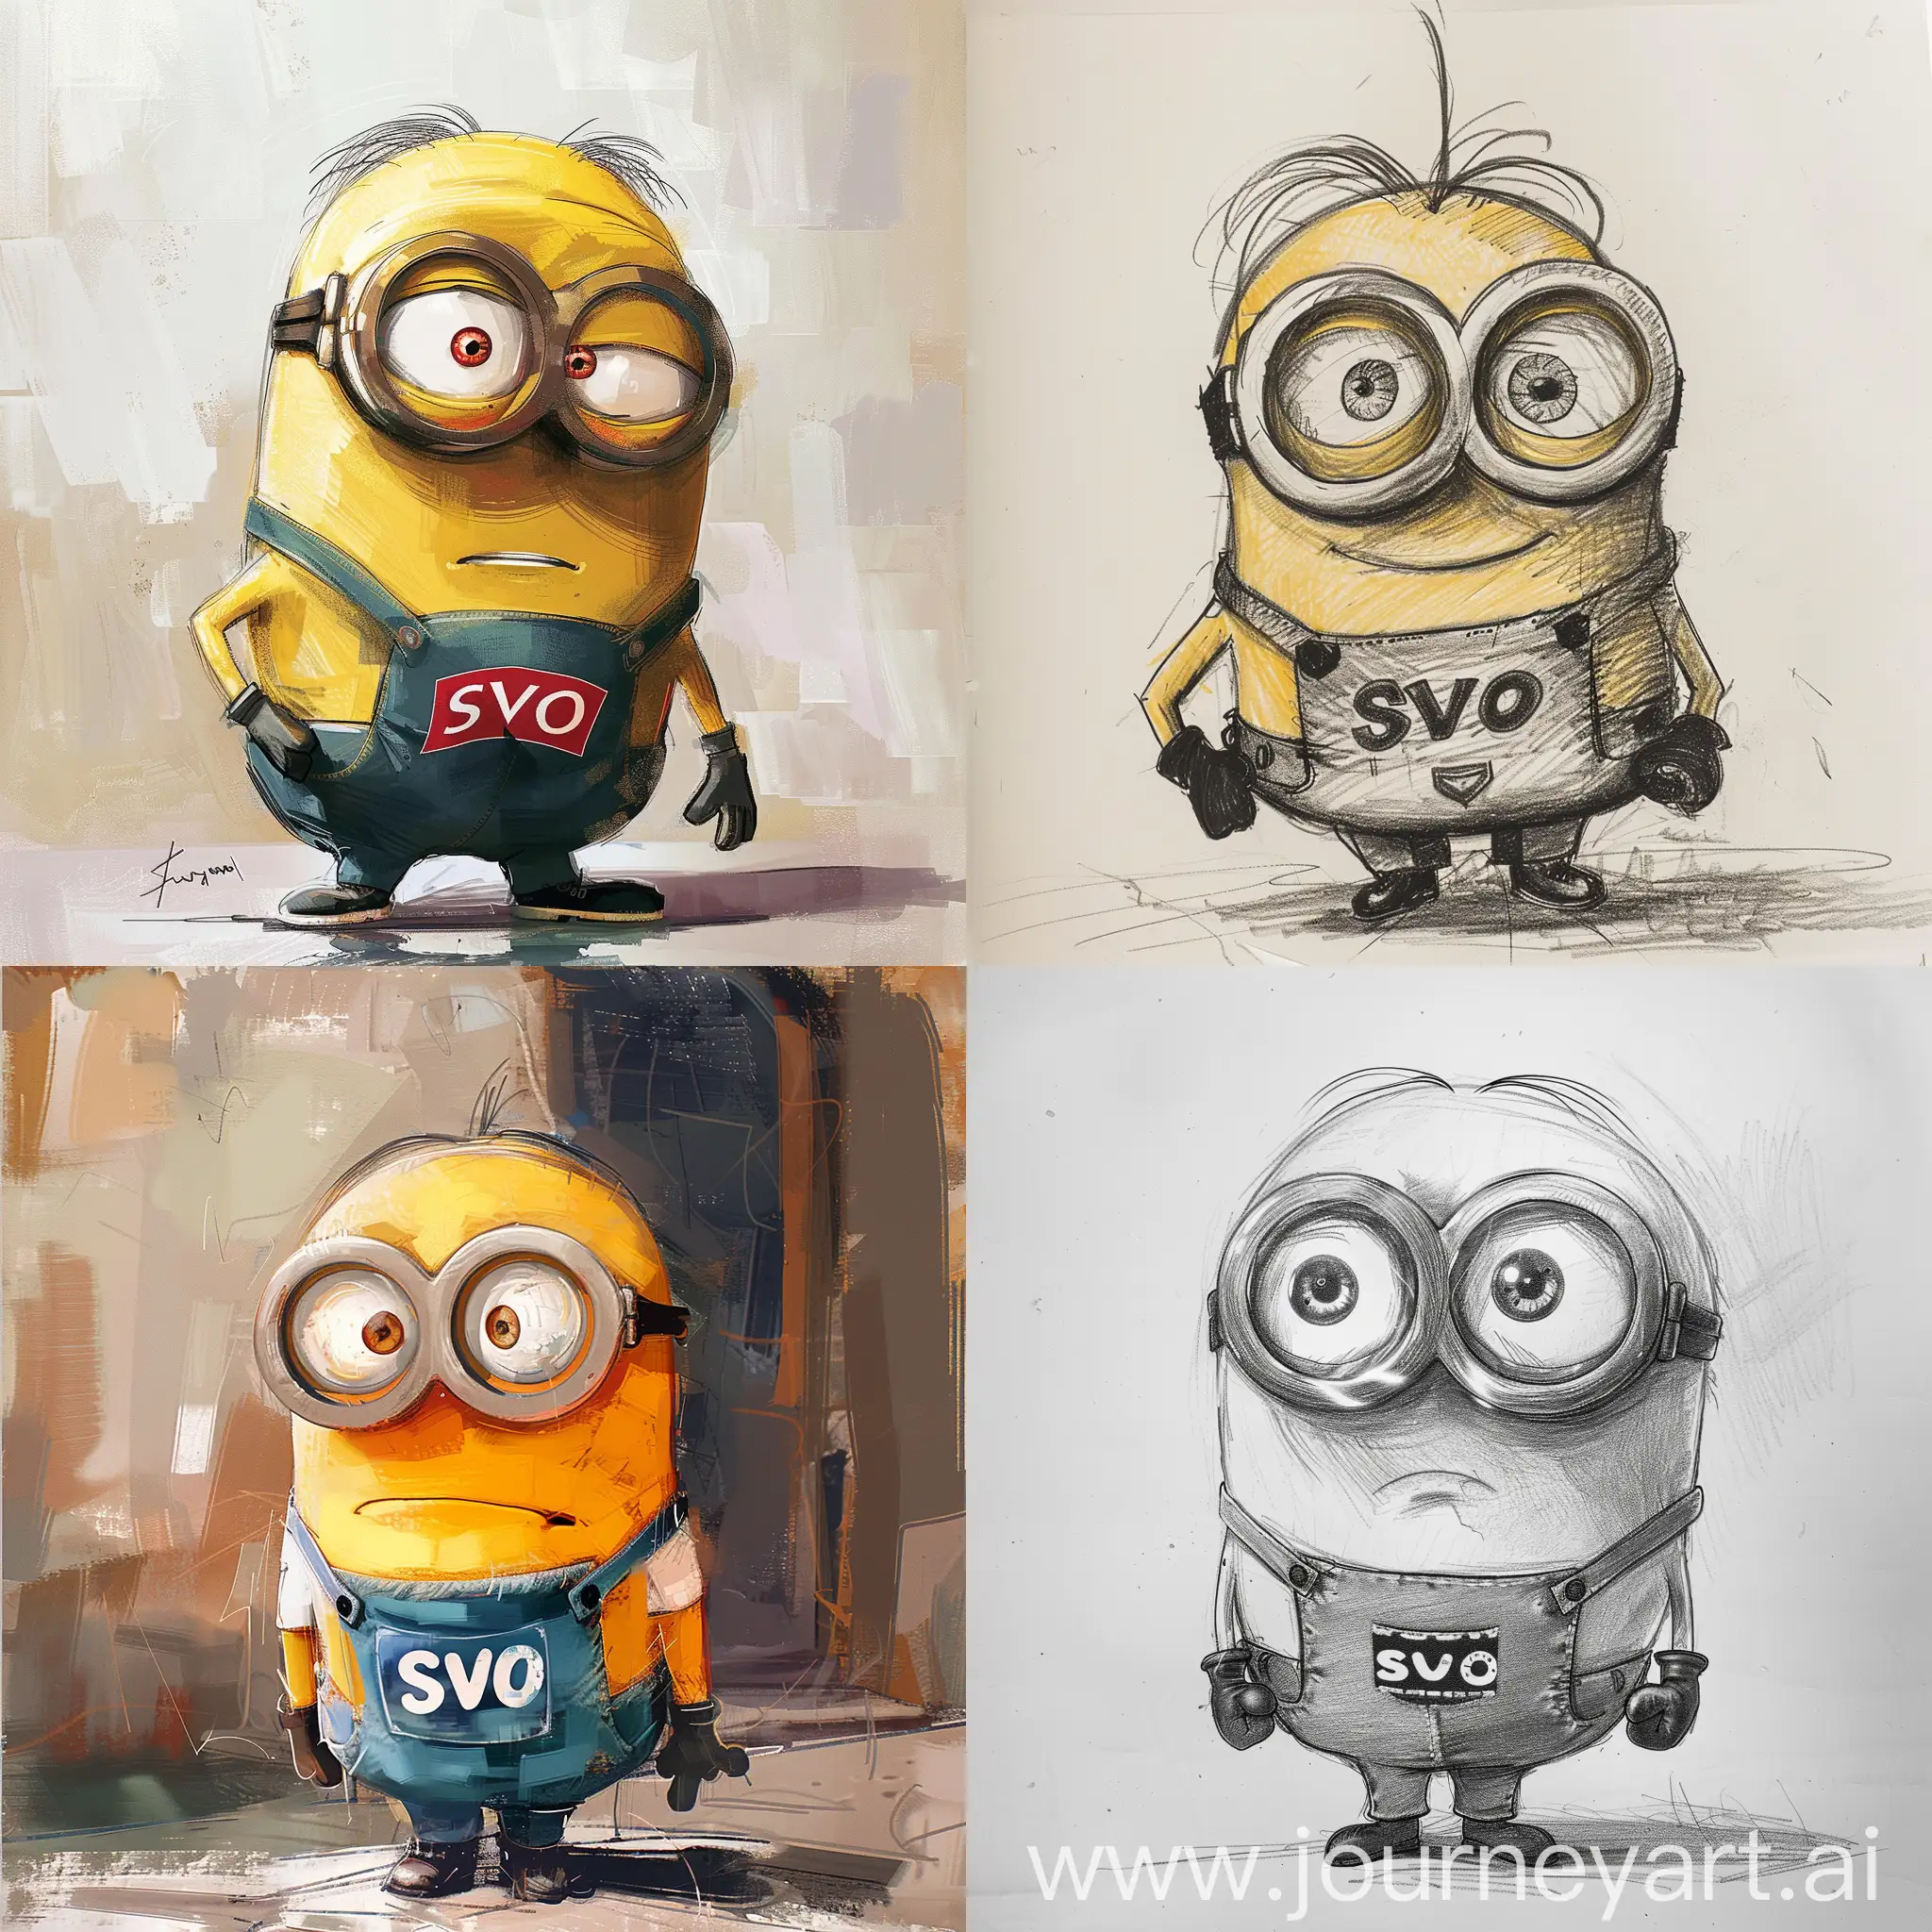 Draw Extractive industries in underdeveloped countries, minion with t-shirt svo